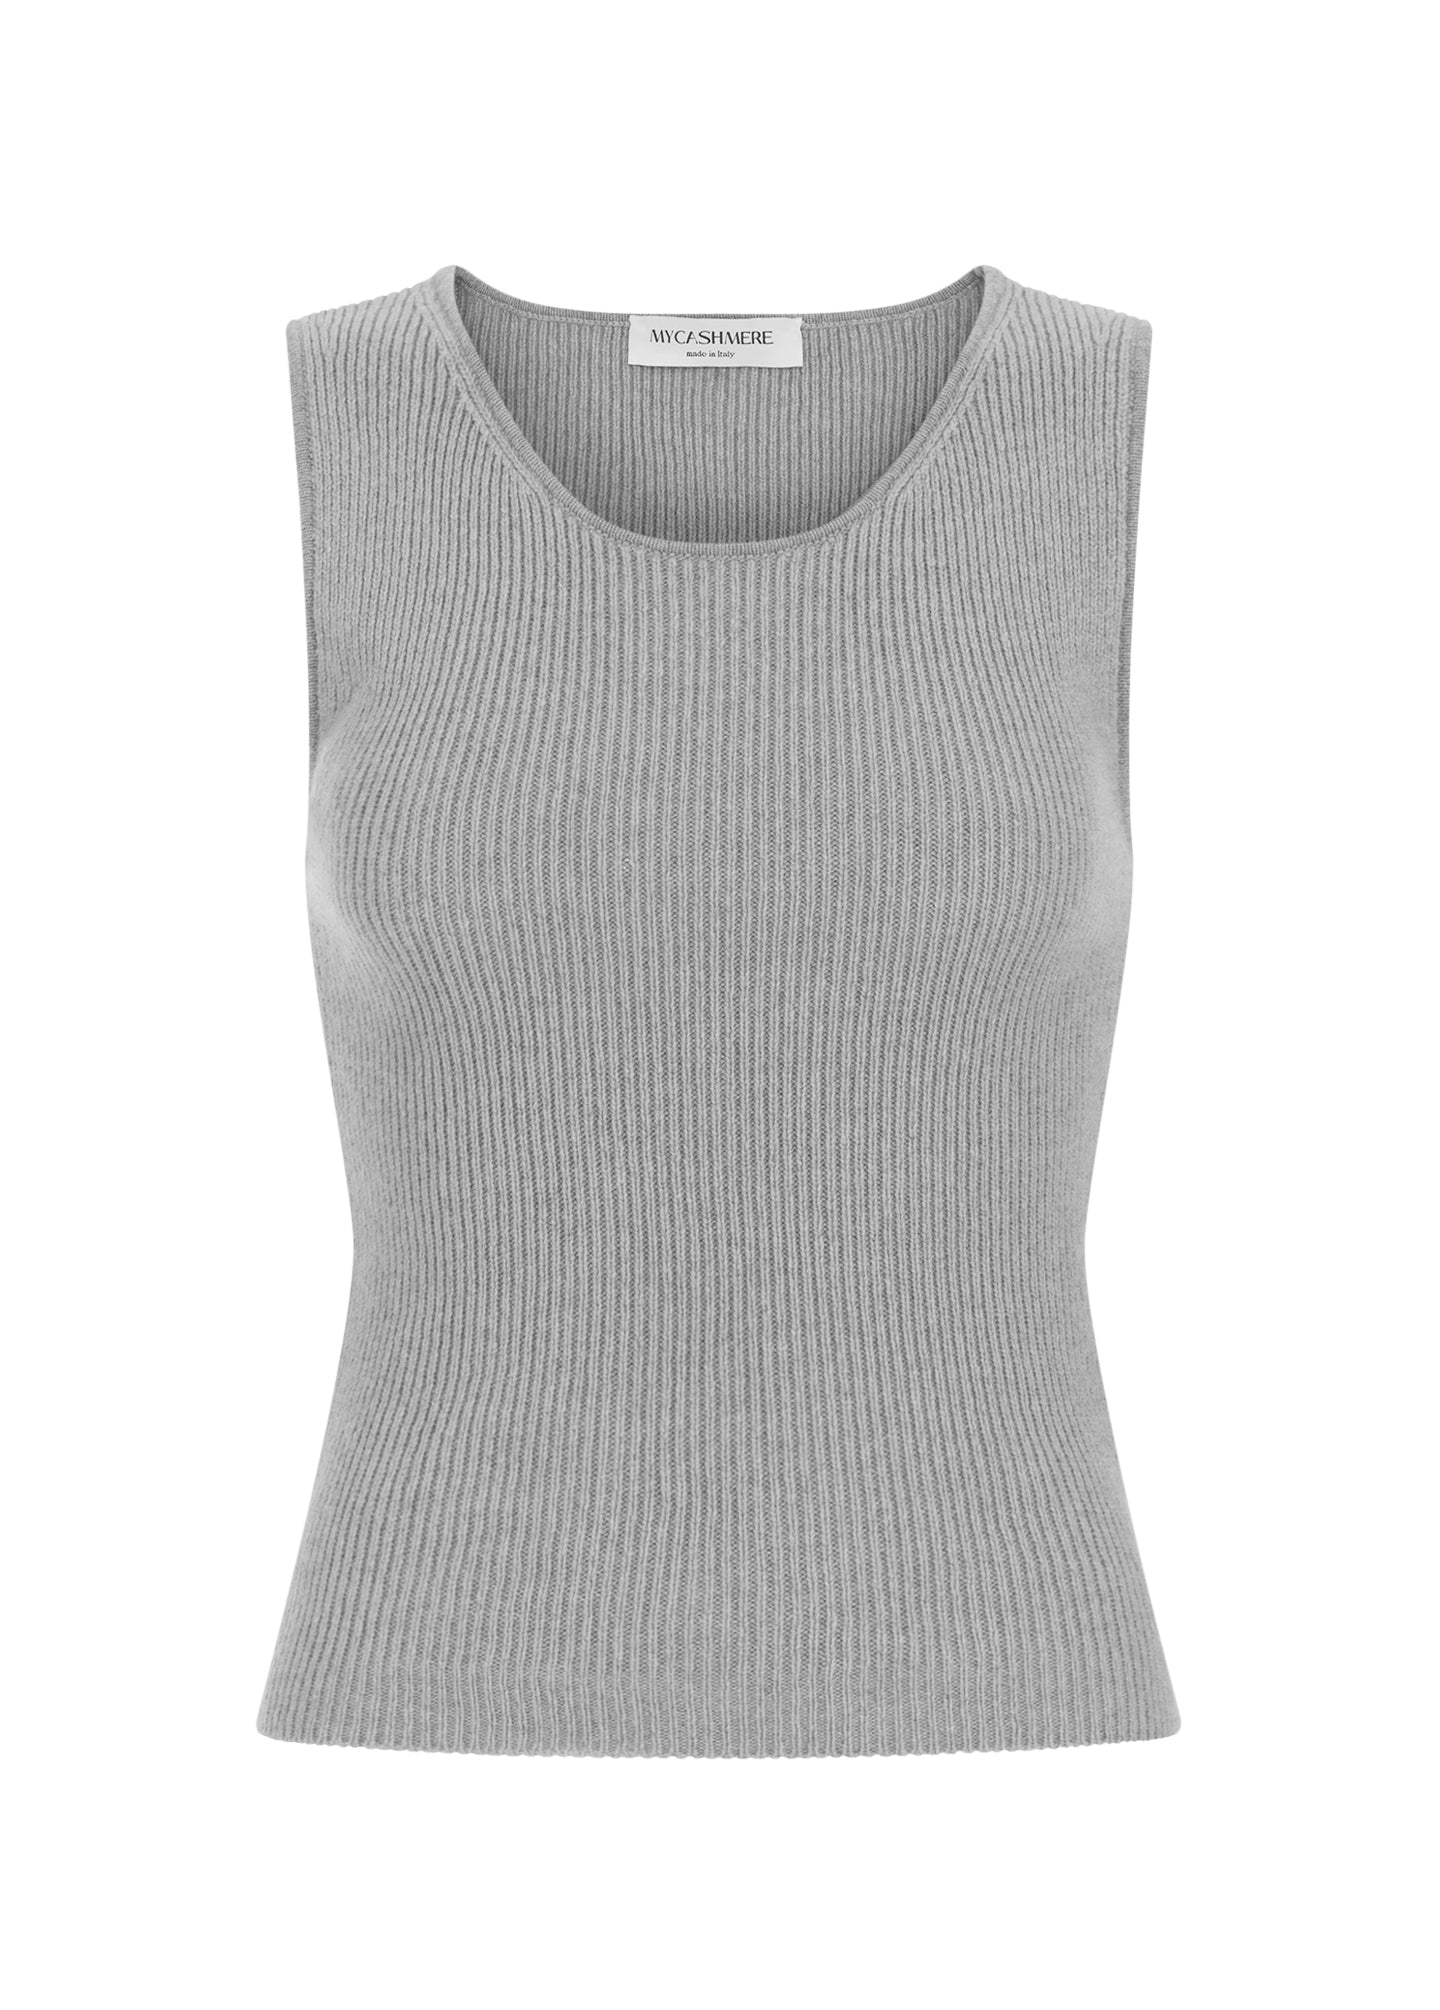 Classic women's cashmere tank top in grey